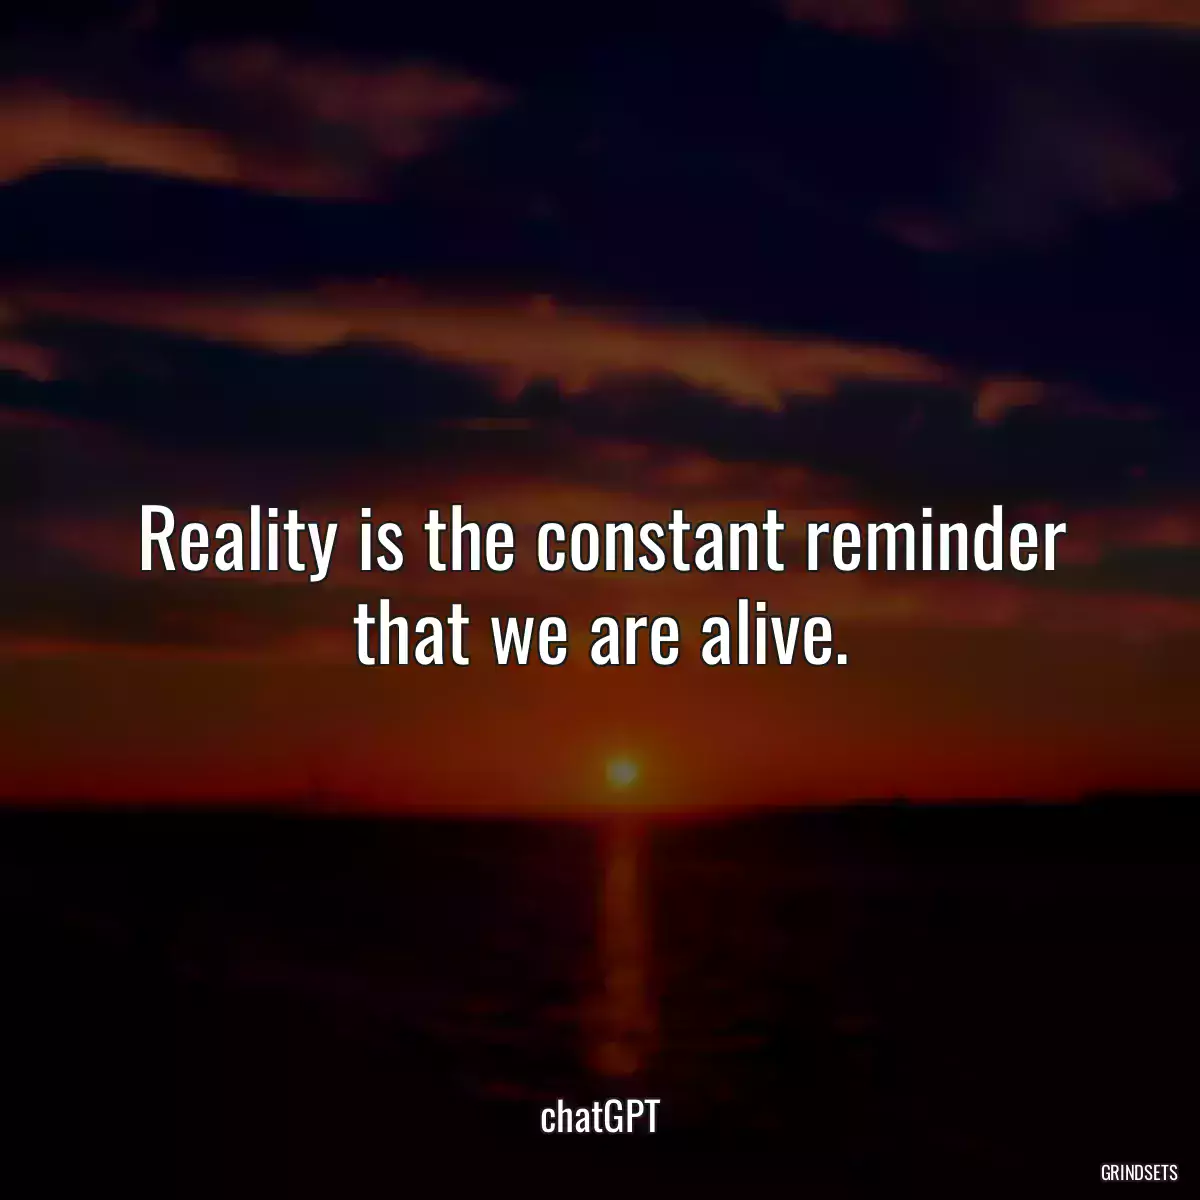 Reality is the constant reminder that we are alive.